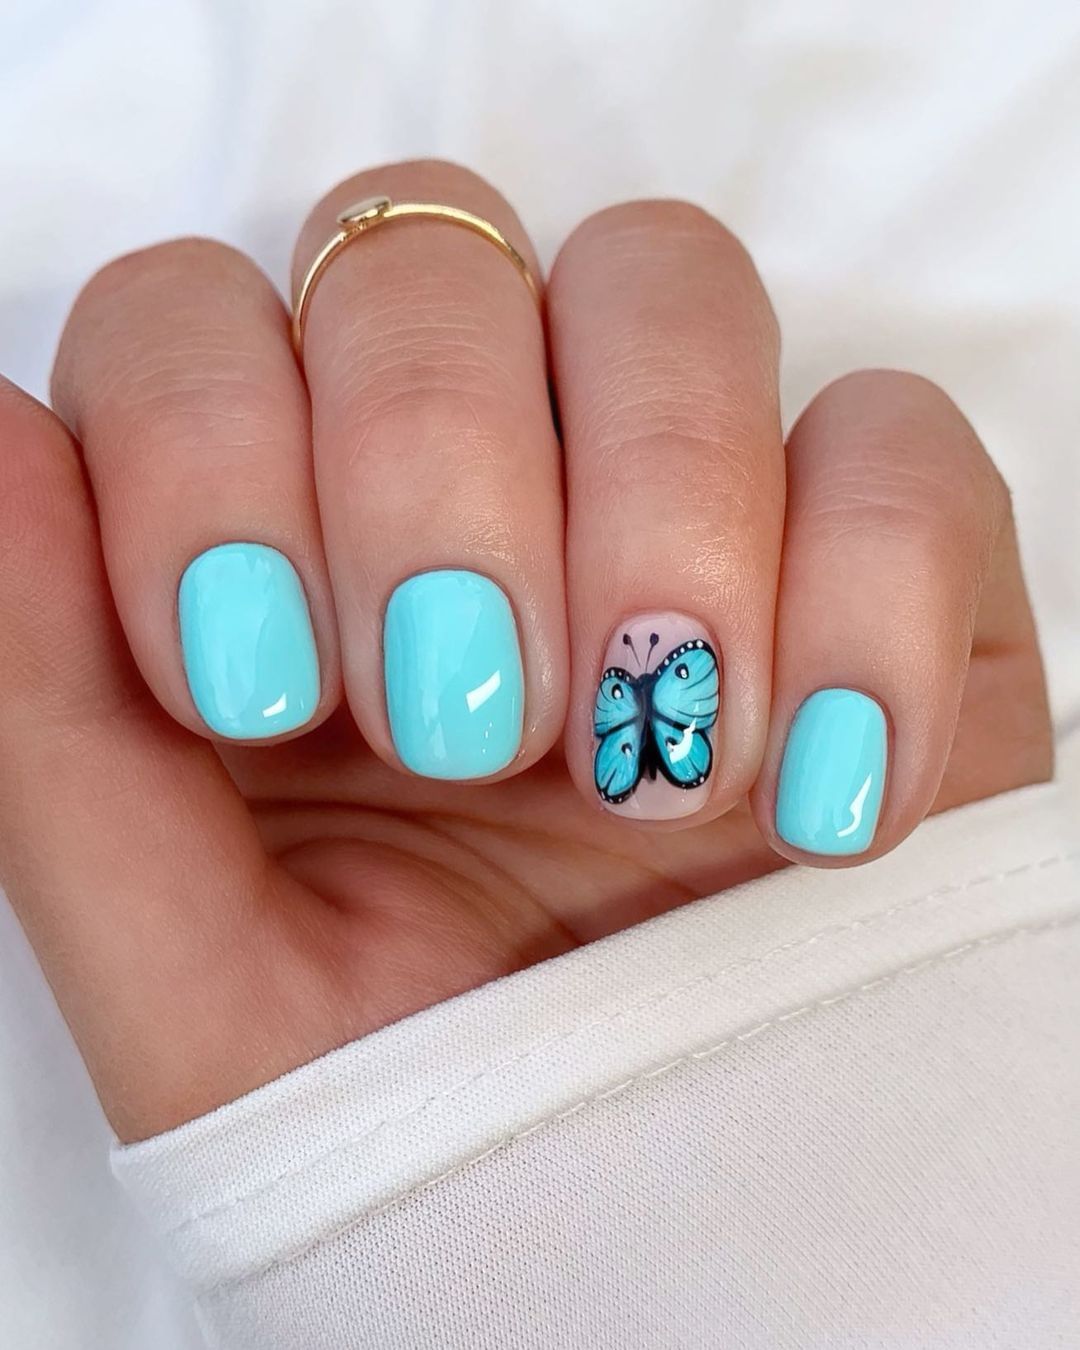 Be Creative with Nail Designs this Summer!